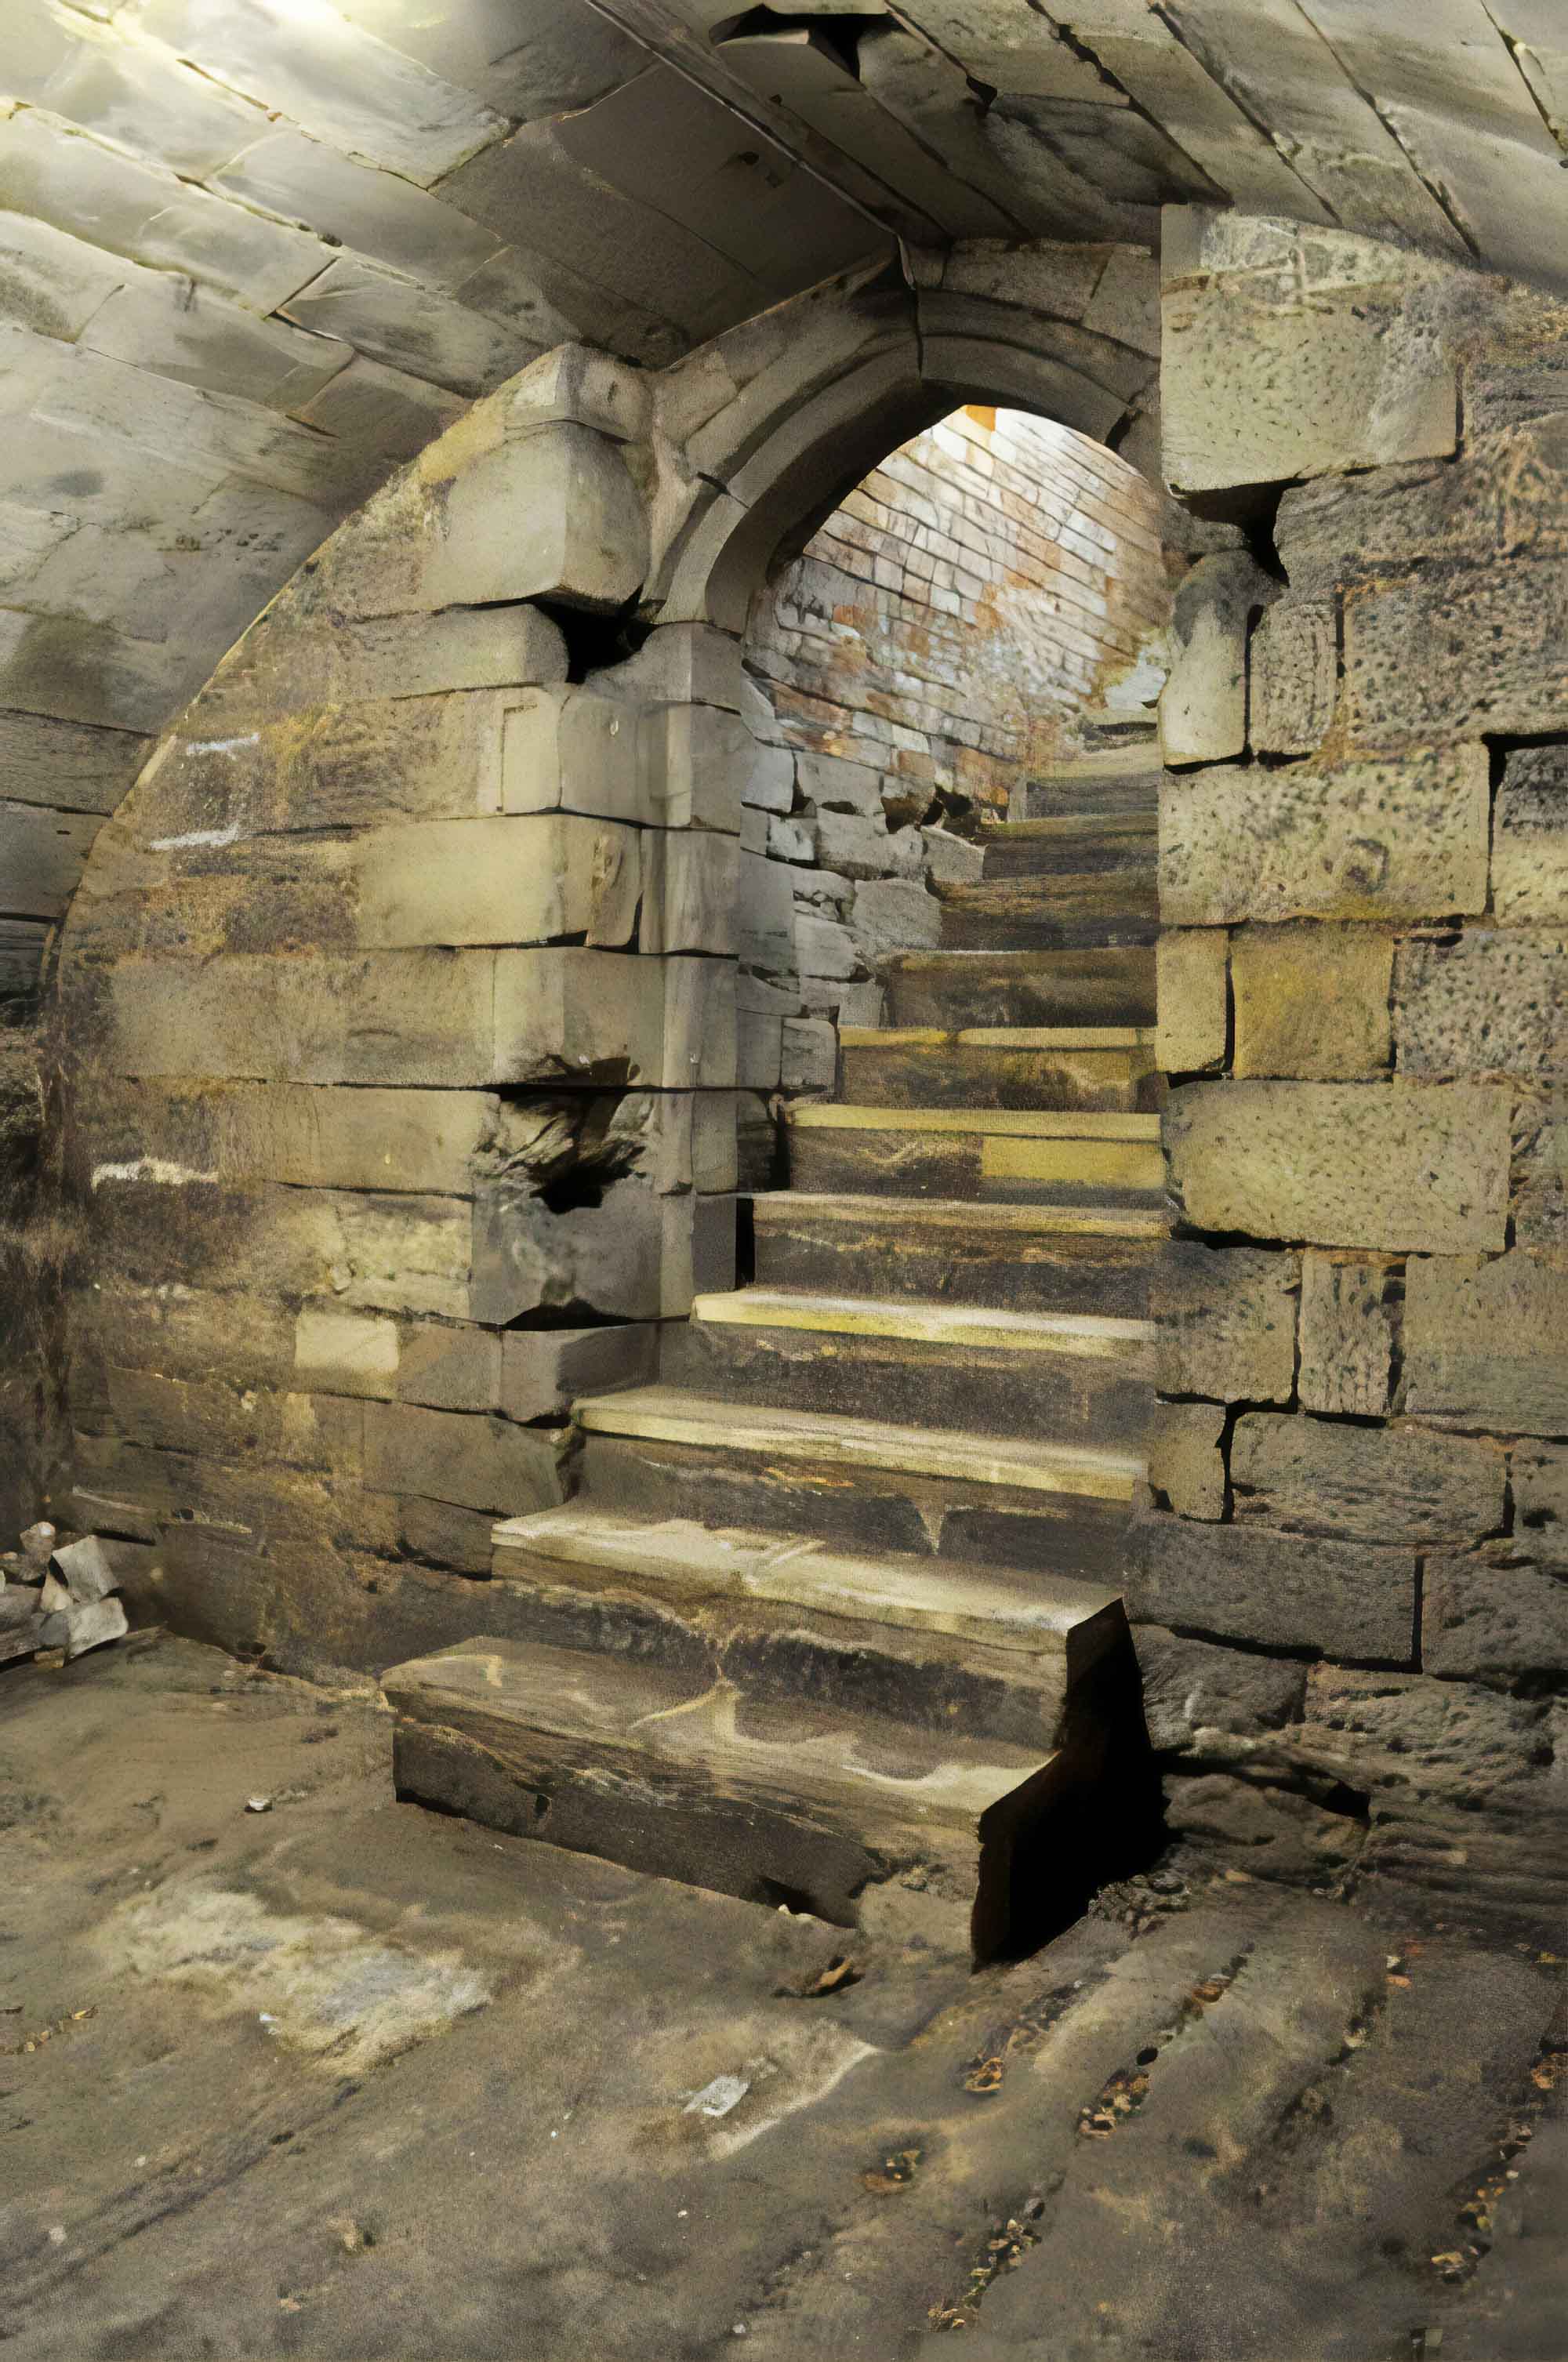 Steps leading down to the cellar - Leicester City Council